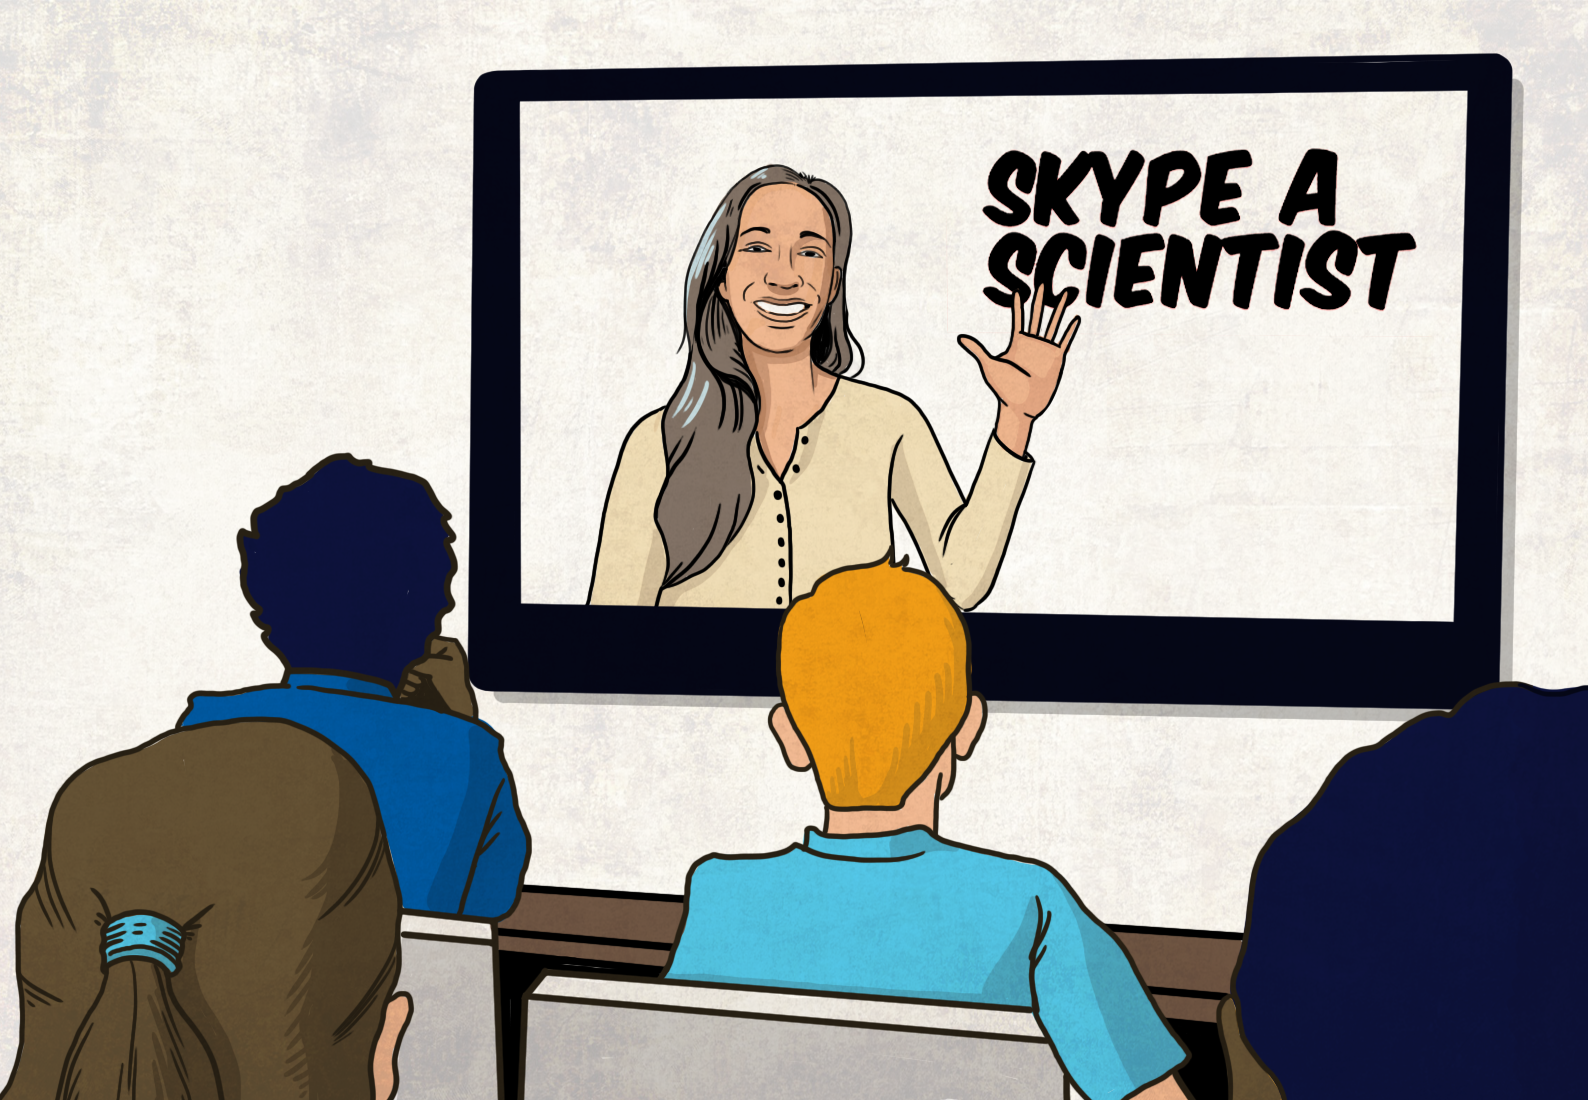 A woman is shown on a video screen interacting with students in a classroom. The text, "Skype a Scientist" is shown on the screen.